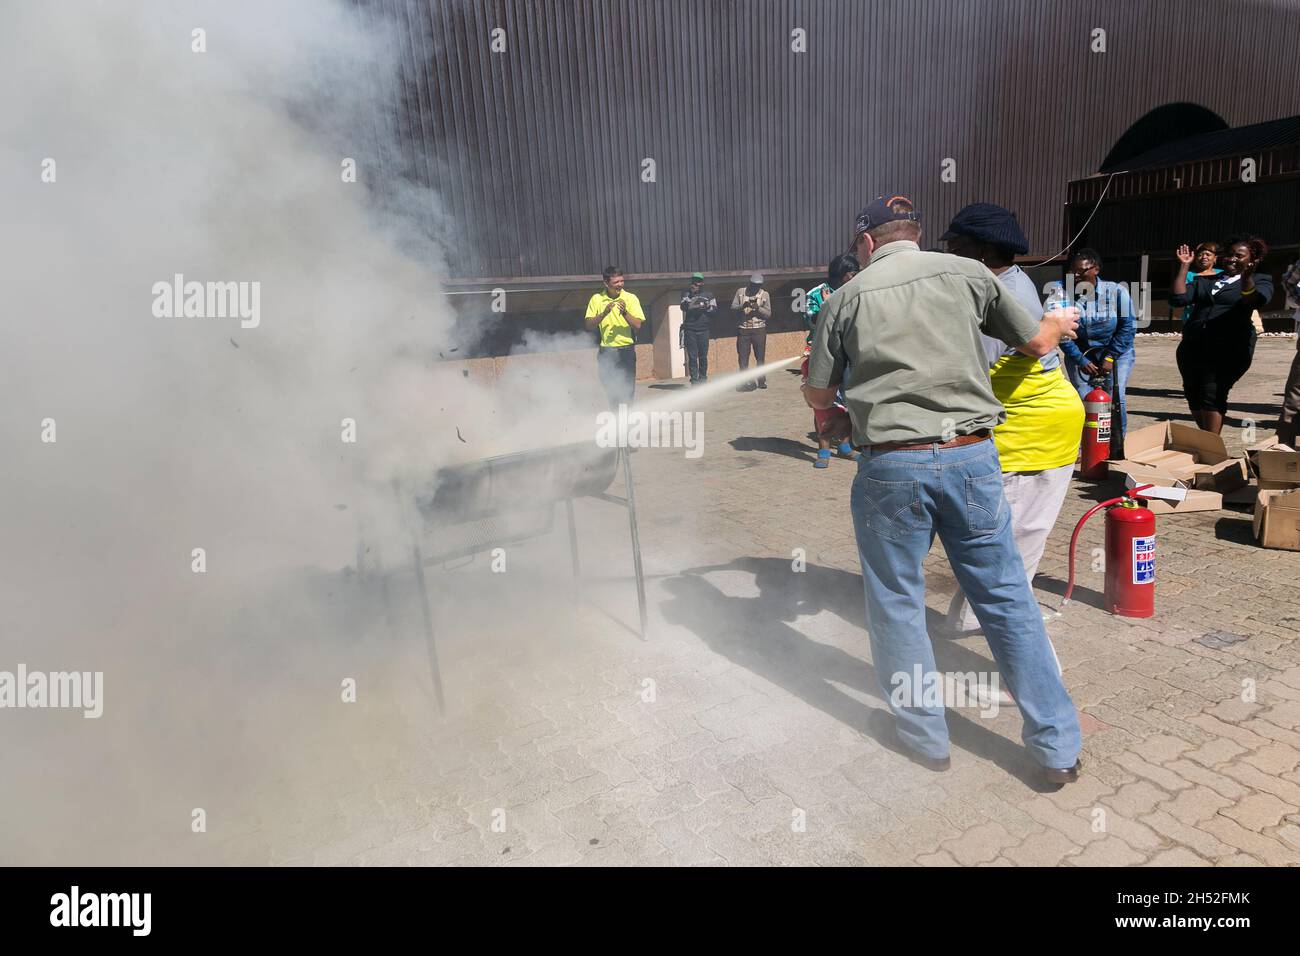 JOHANNESBURG, SOUTH AFRICA - Aug 12, 2021: The process of fire hazard training with a powder-based extinguisher in Johannesburg, South Africa Stock Photo